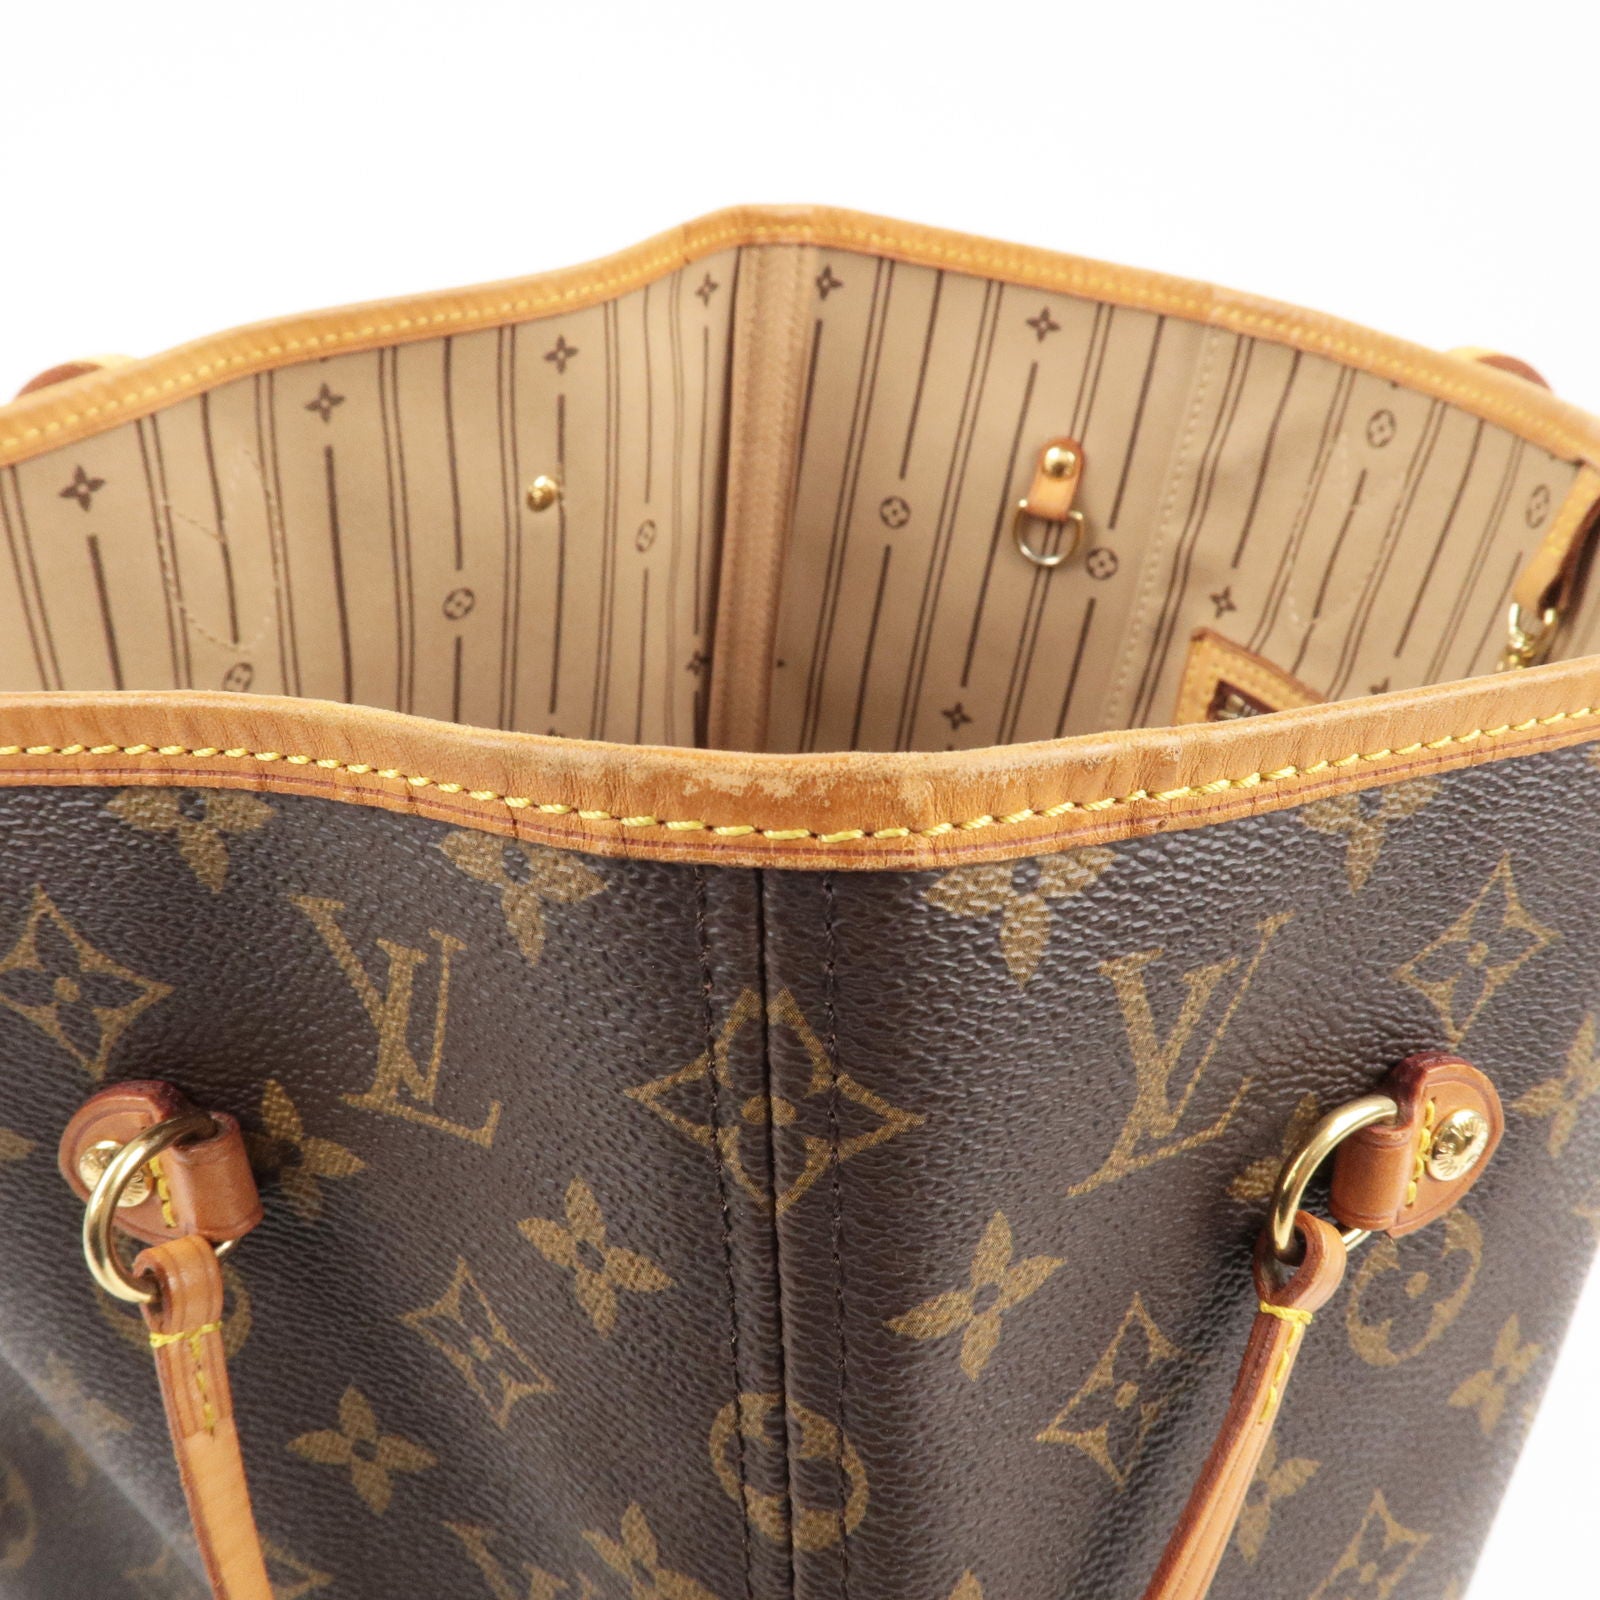 MM - ep_vintage luxury Store - M40156 – dct - Tote - Neverfull